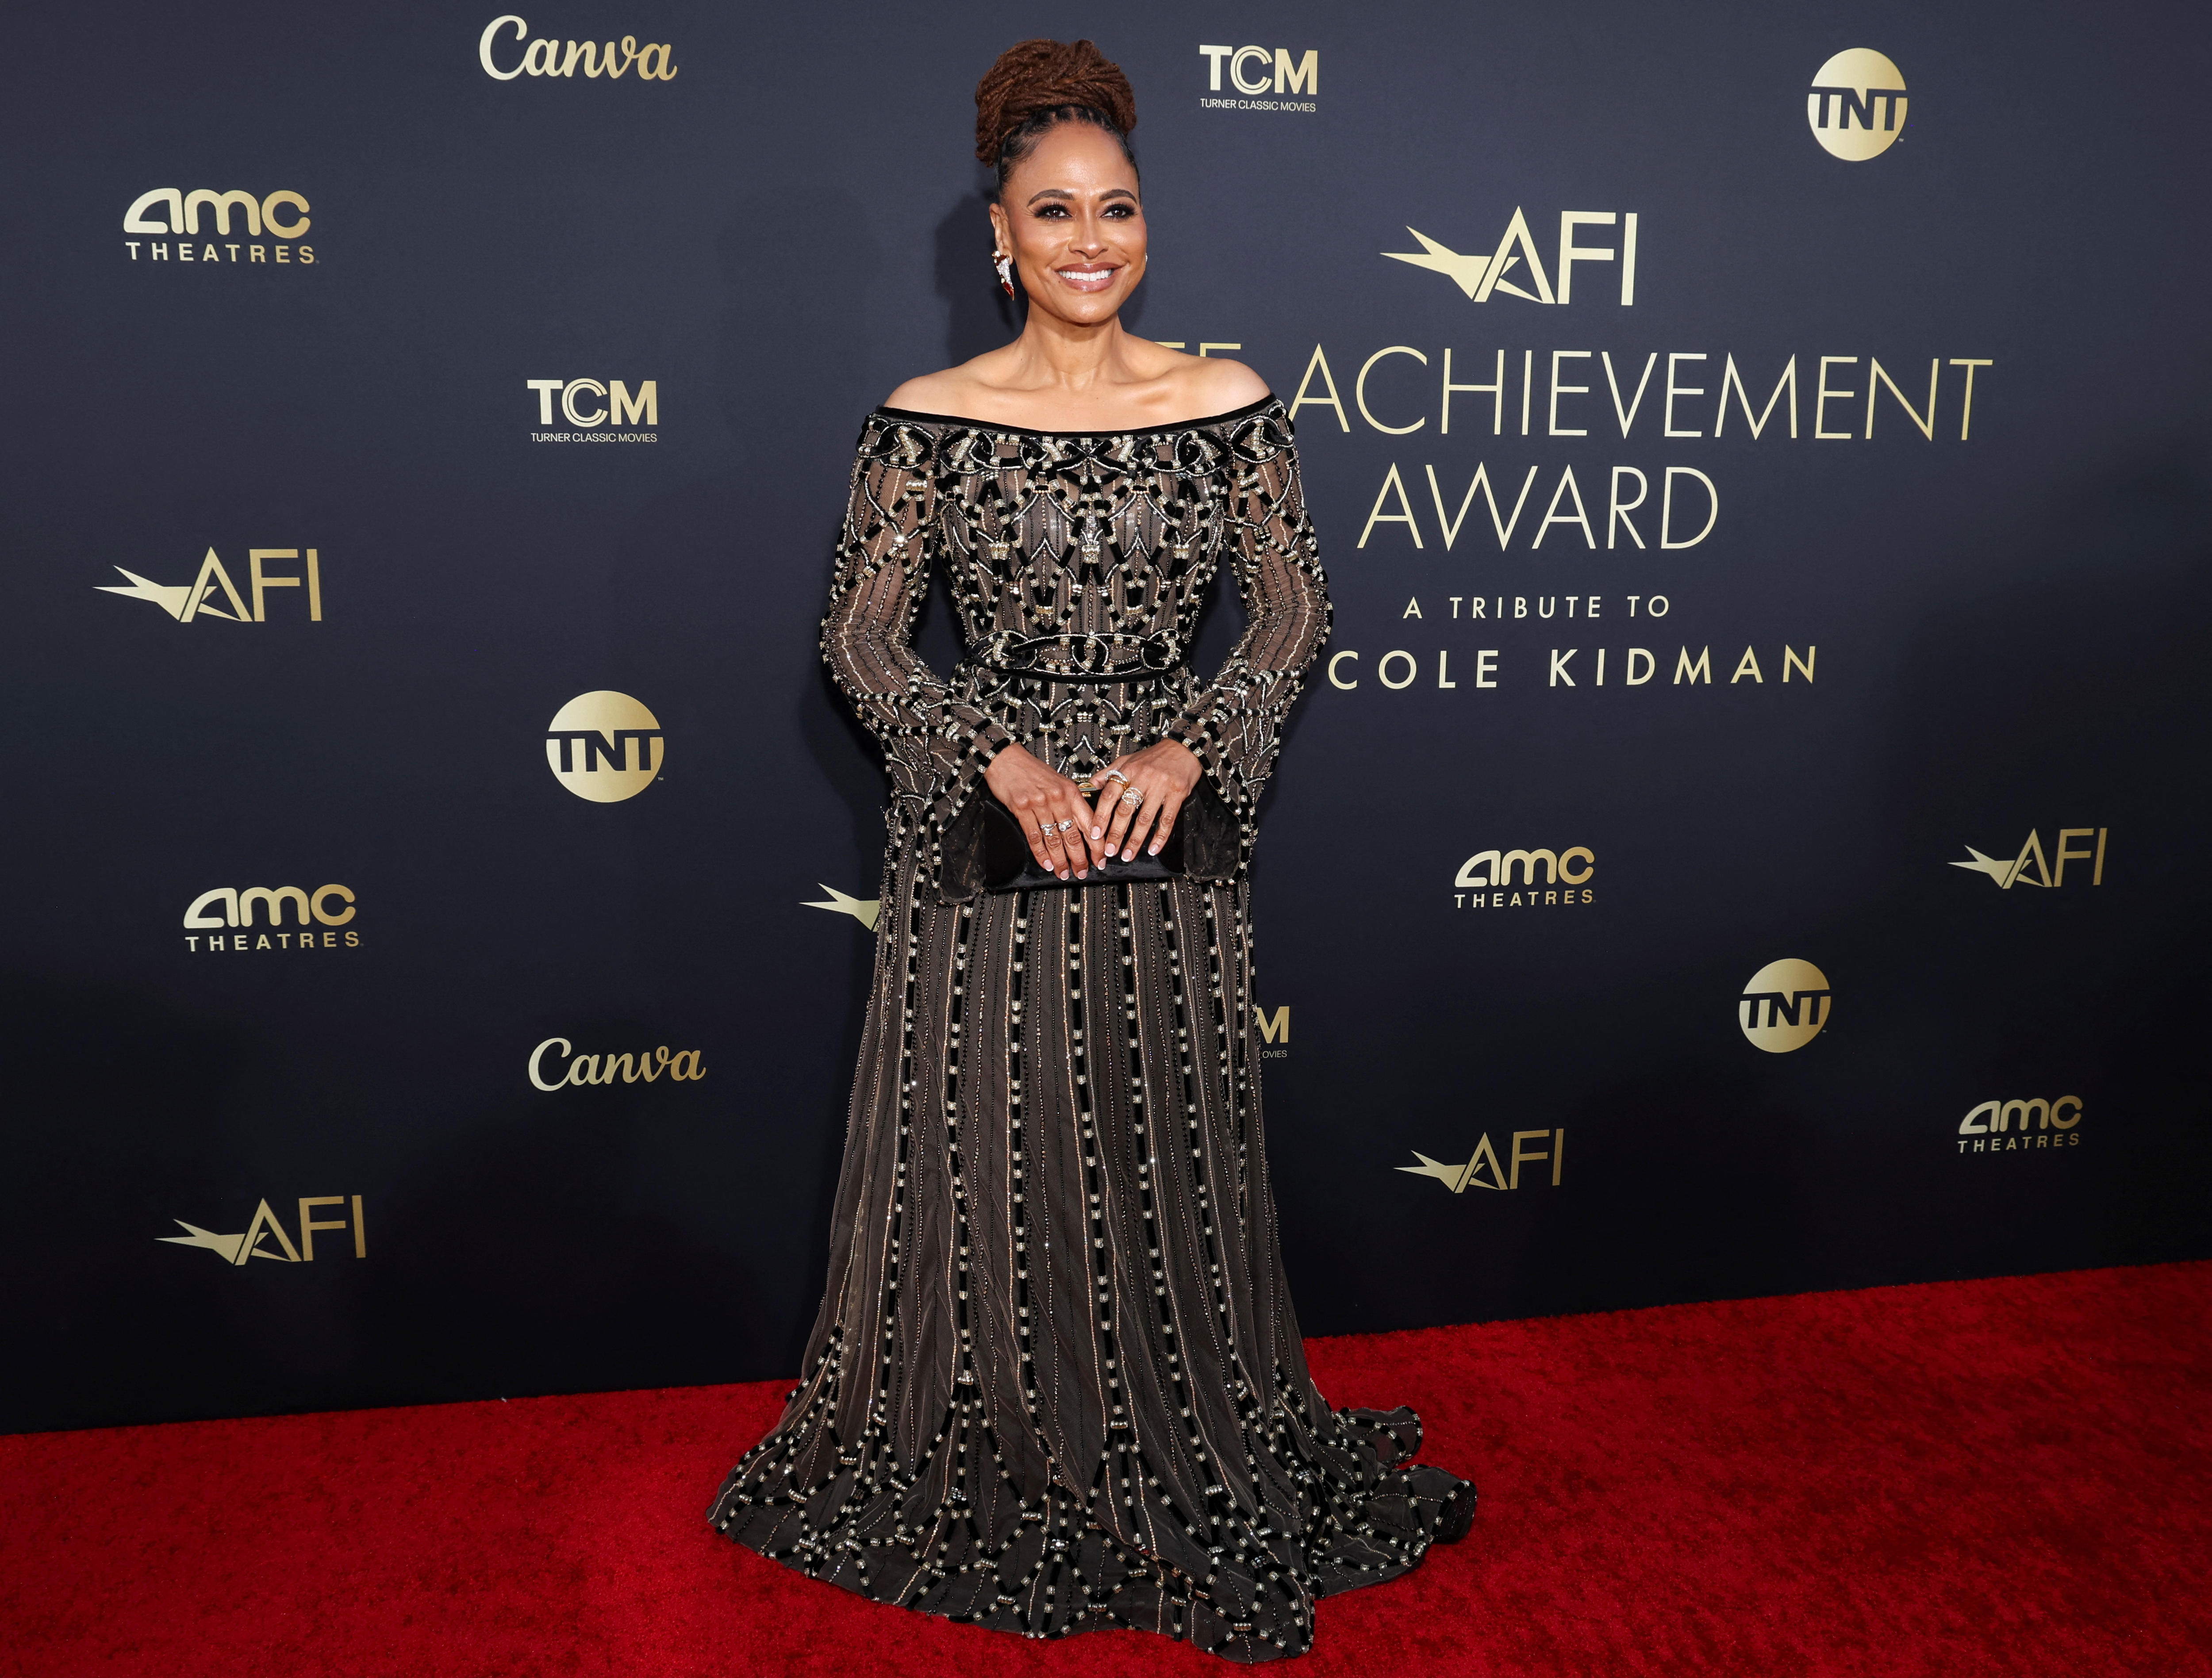 Ava DuVernay wearing a long black lacy gown with long sleeves and an off-the-shoulder neckline